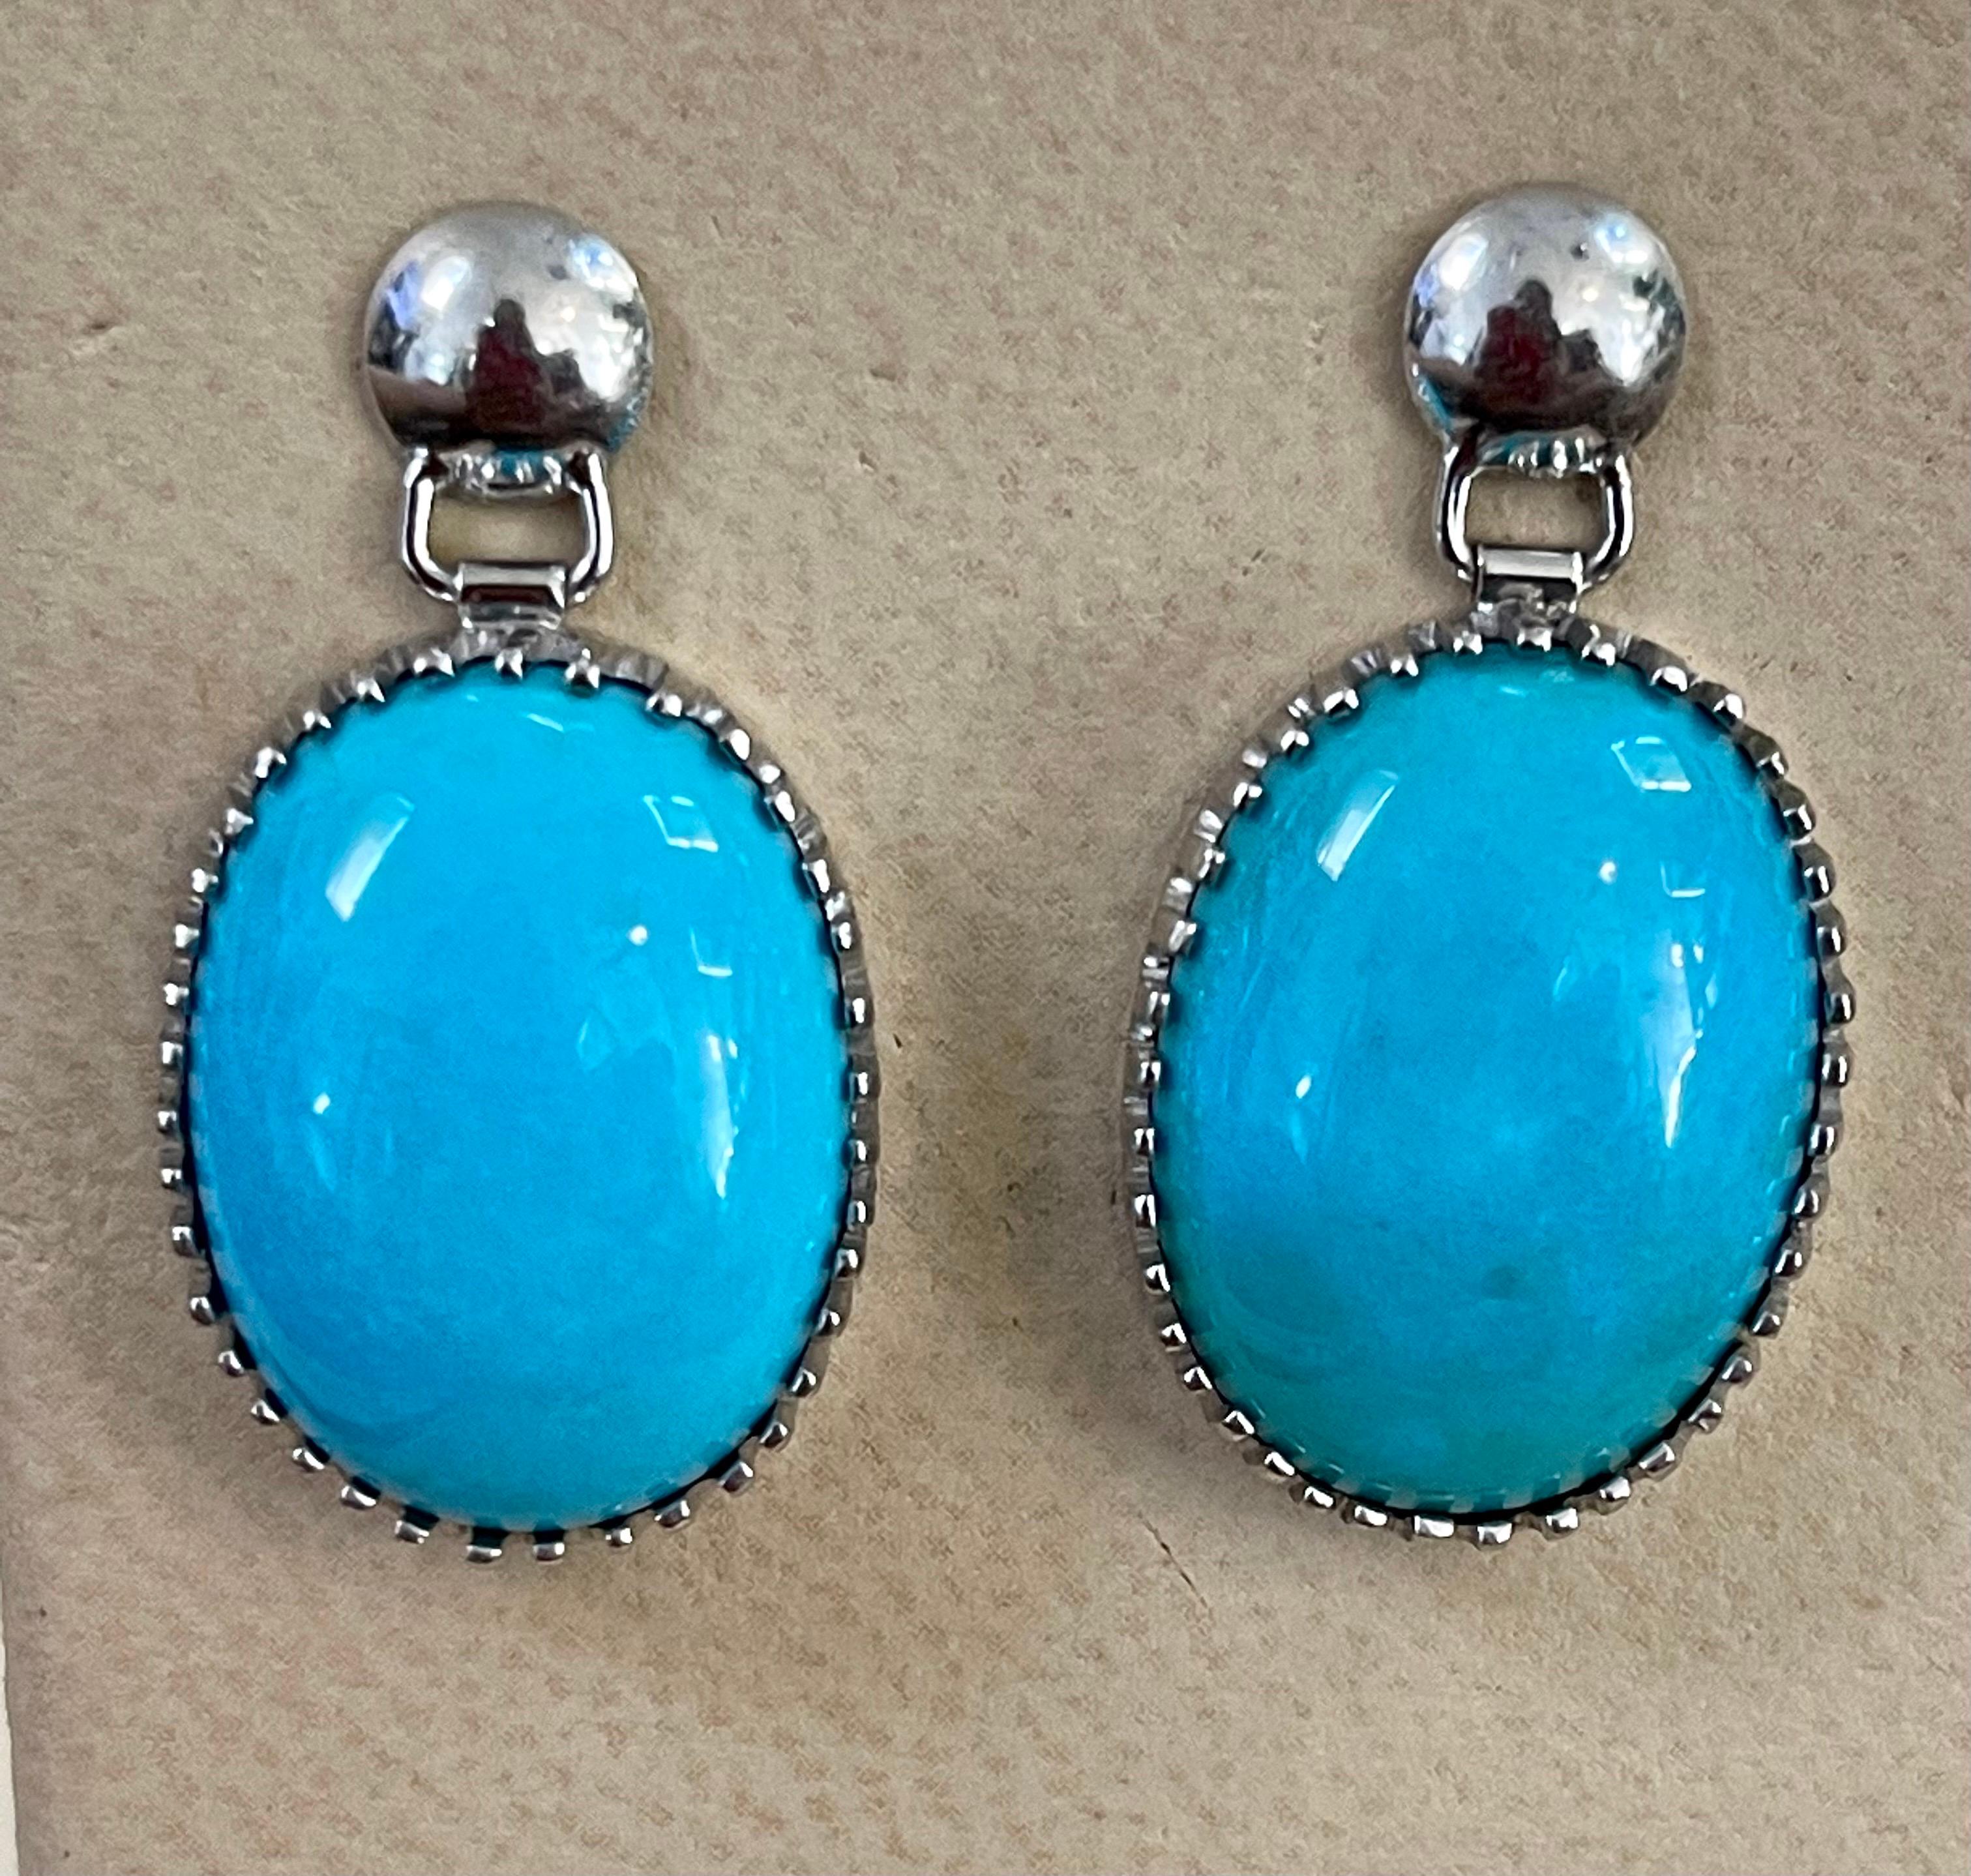 22 Carat Natural Sleeping Beauty Turquoise Cocktail Earring 18 Karat White Gold For Sale 1